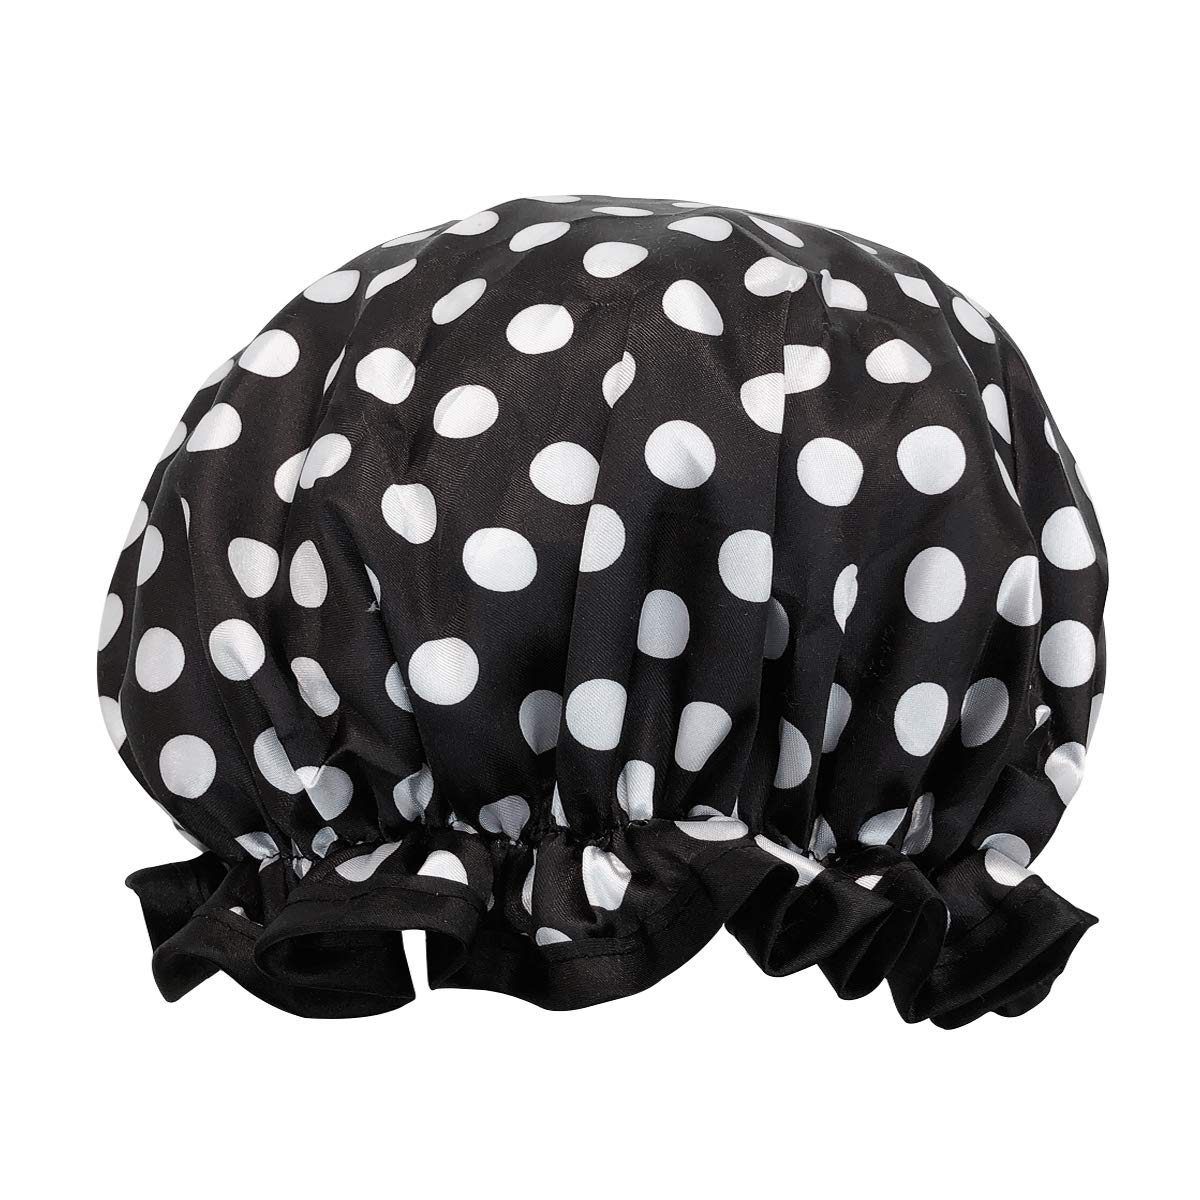 allydrew Reusable Women's Waterproof Shower Caps for Long Hair, Black and White Dots